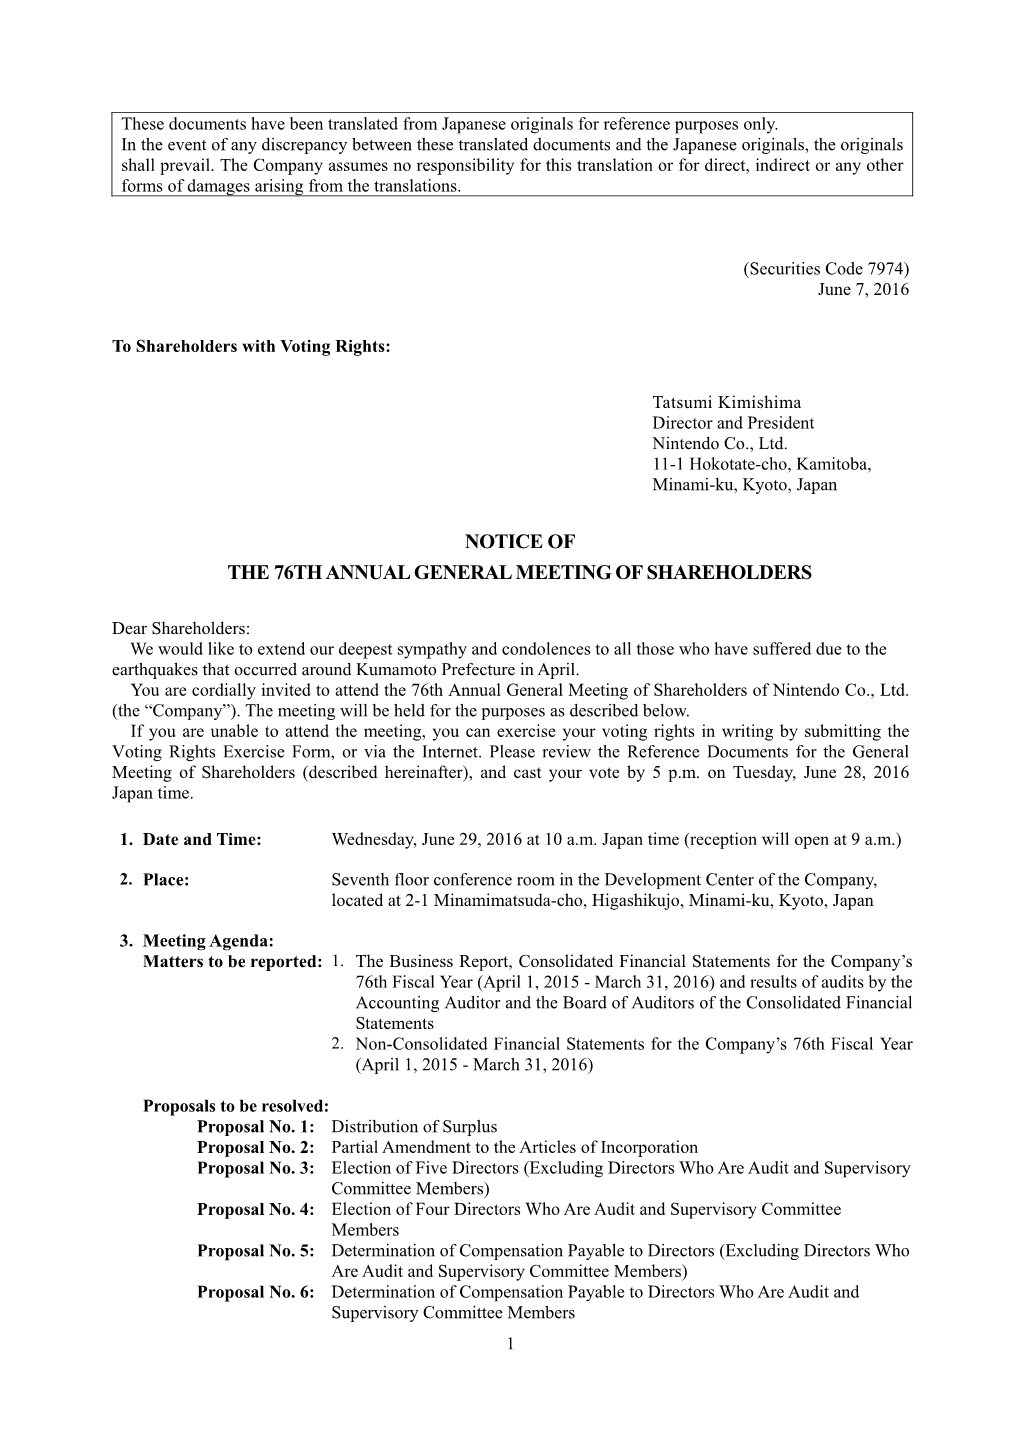 Notice of the 76Th Annual General Meeting of Shareholders (160KB)